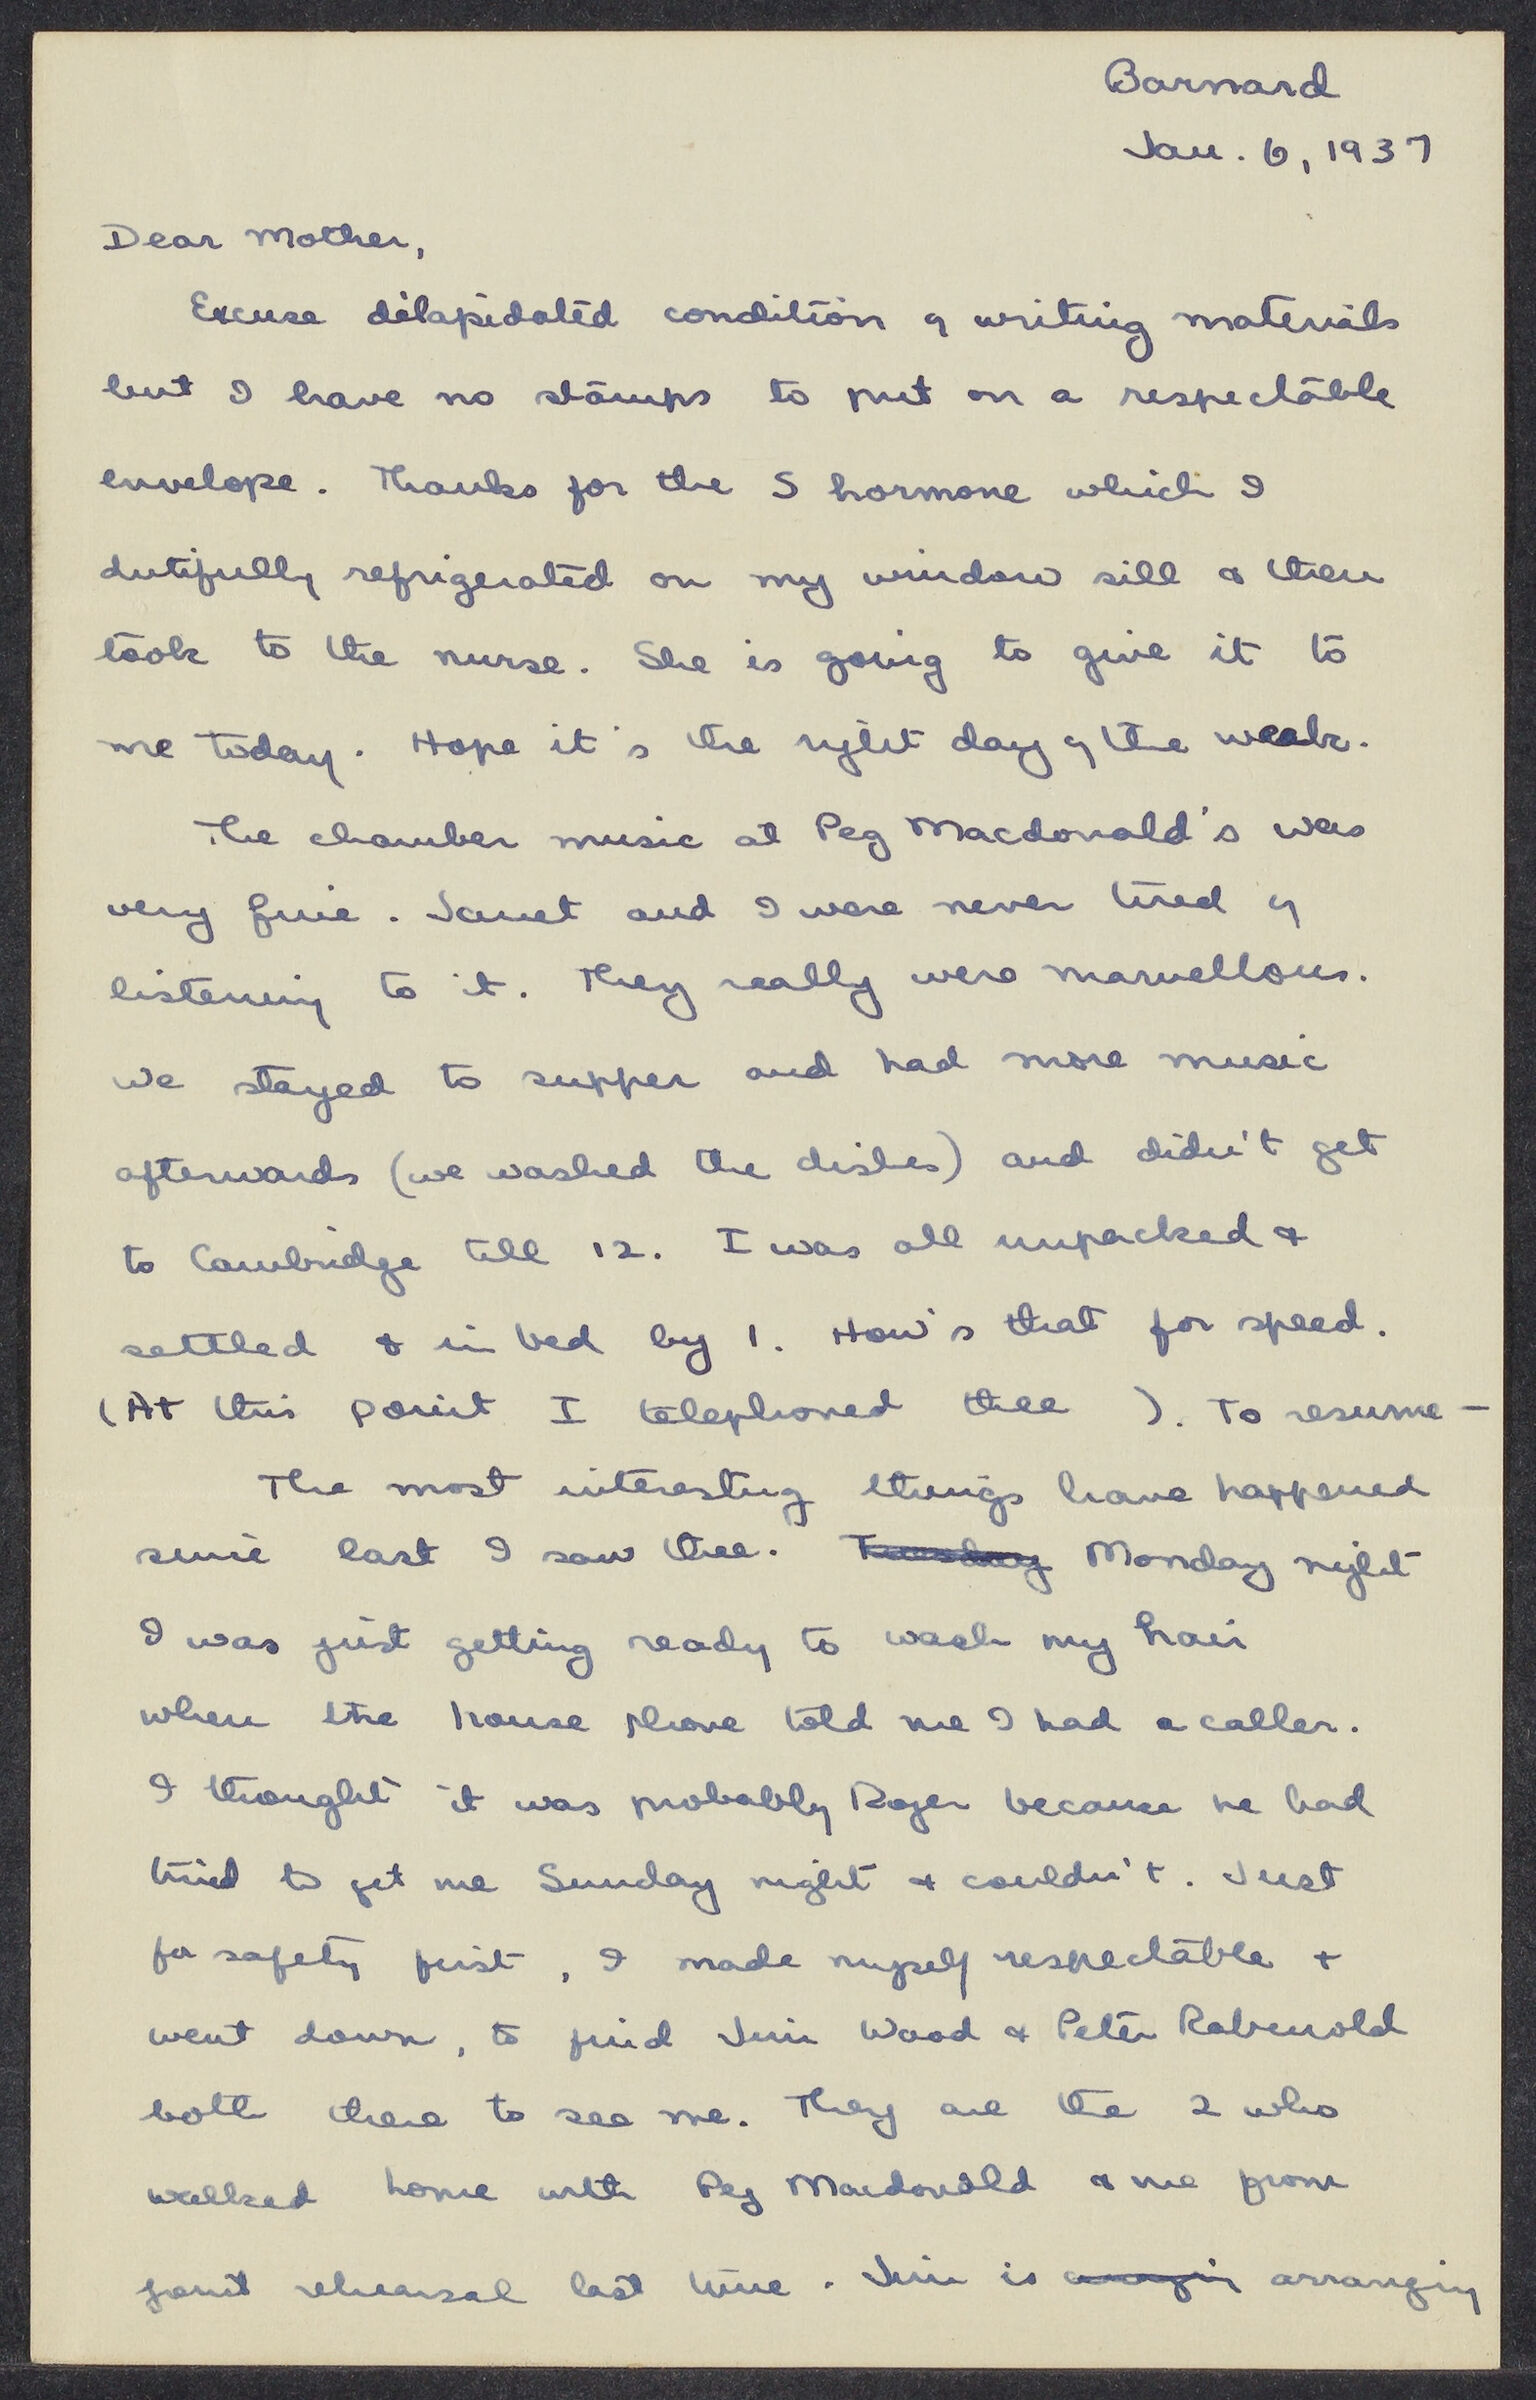 Letters from Margaret Brooks Morse to Eleanor Stabler Brooks, Charles Franklin Brooks, and siblings, 1937